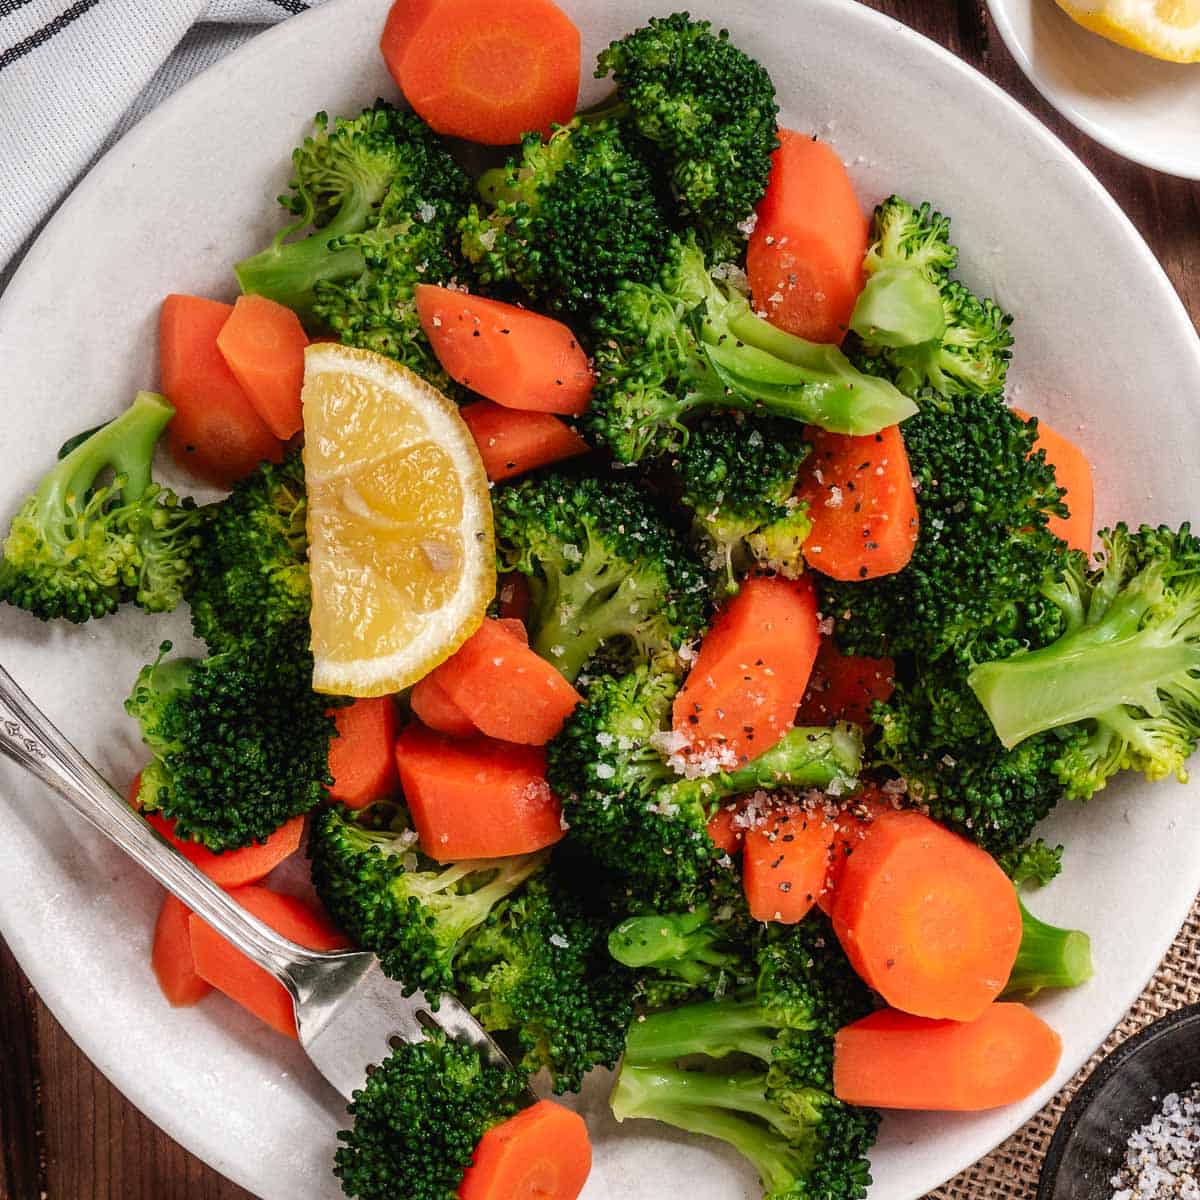 Steamed broccoli and fresh carrots on a white plate with a lemon slice.